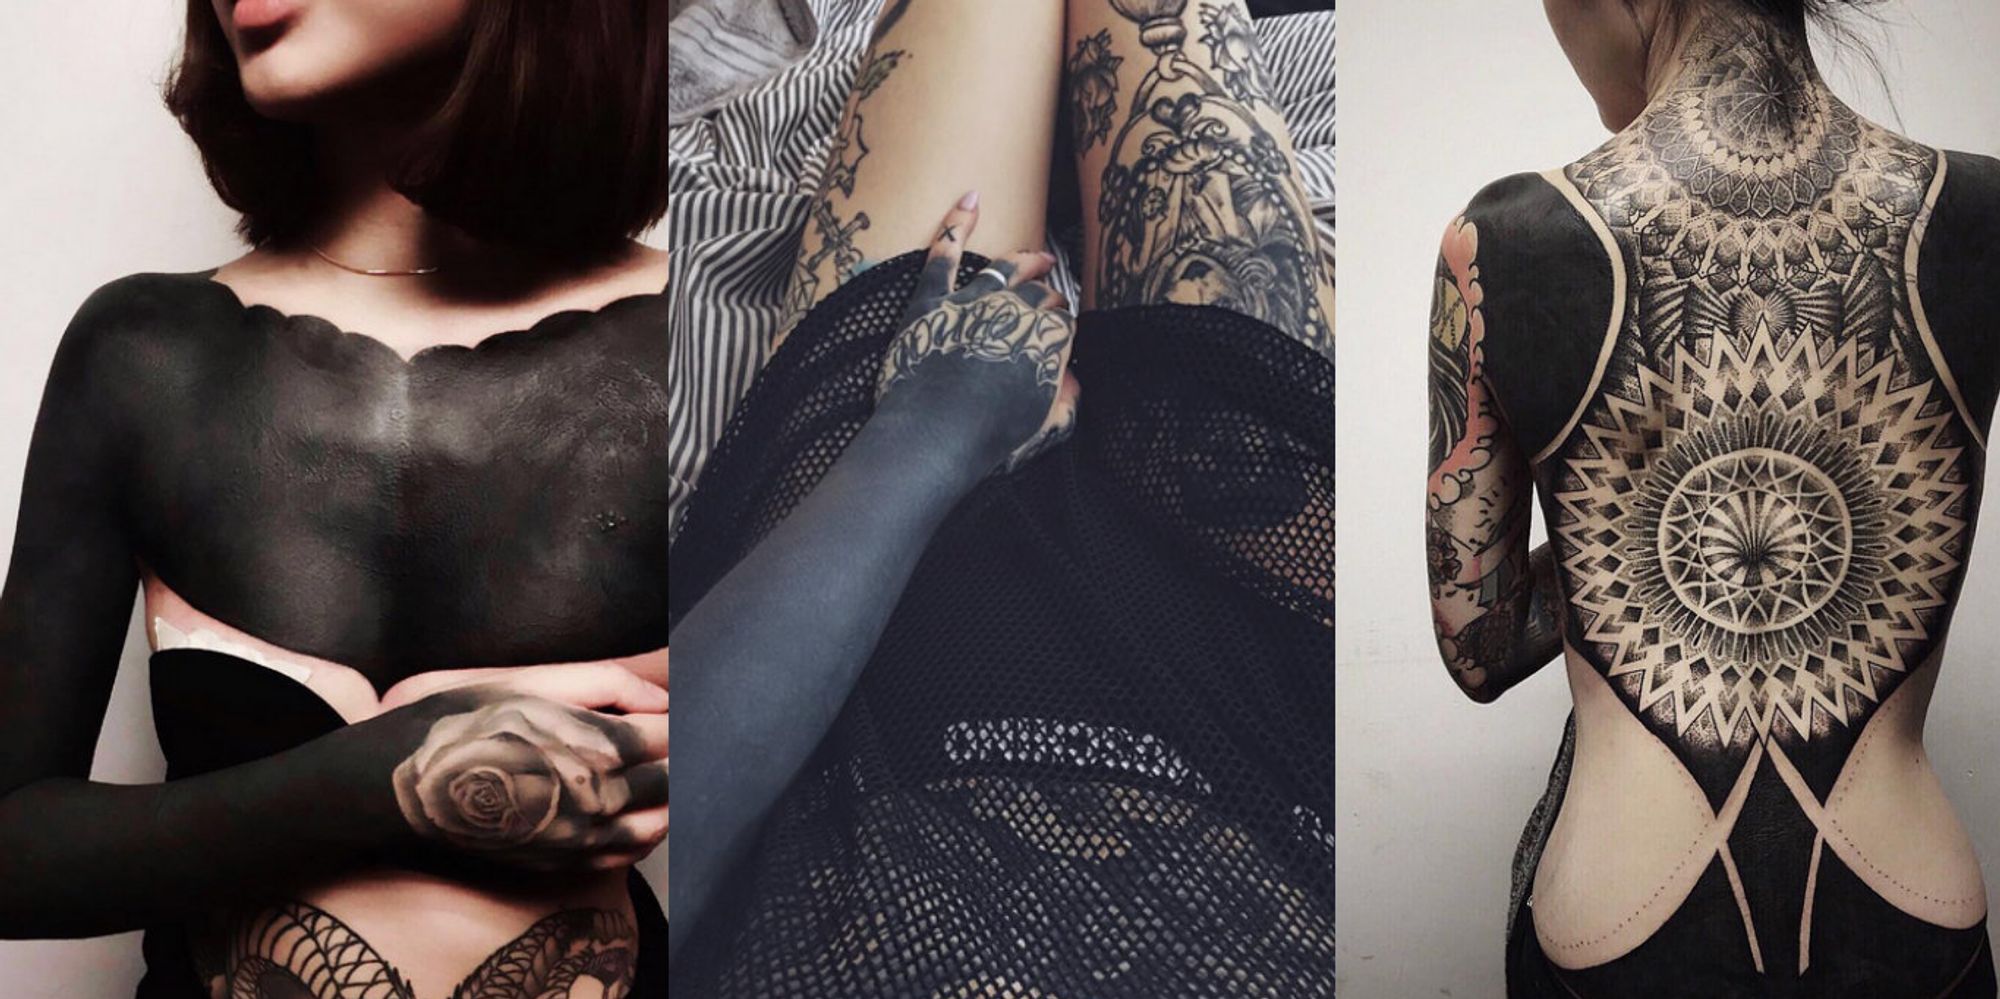 Blackout Tattoos Are The Most Extreme New Body Art Trend Huffpost Uk